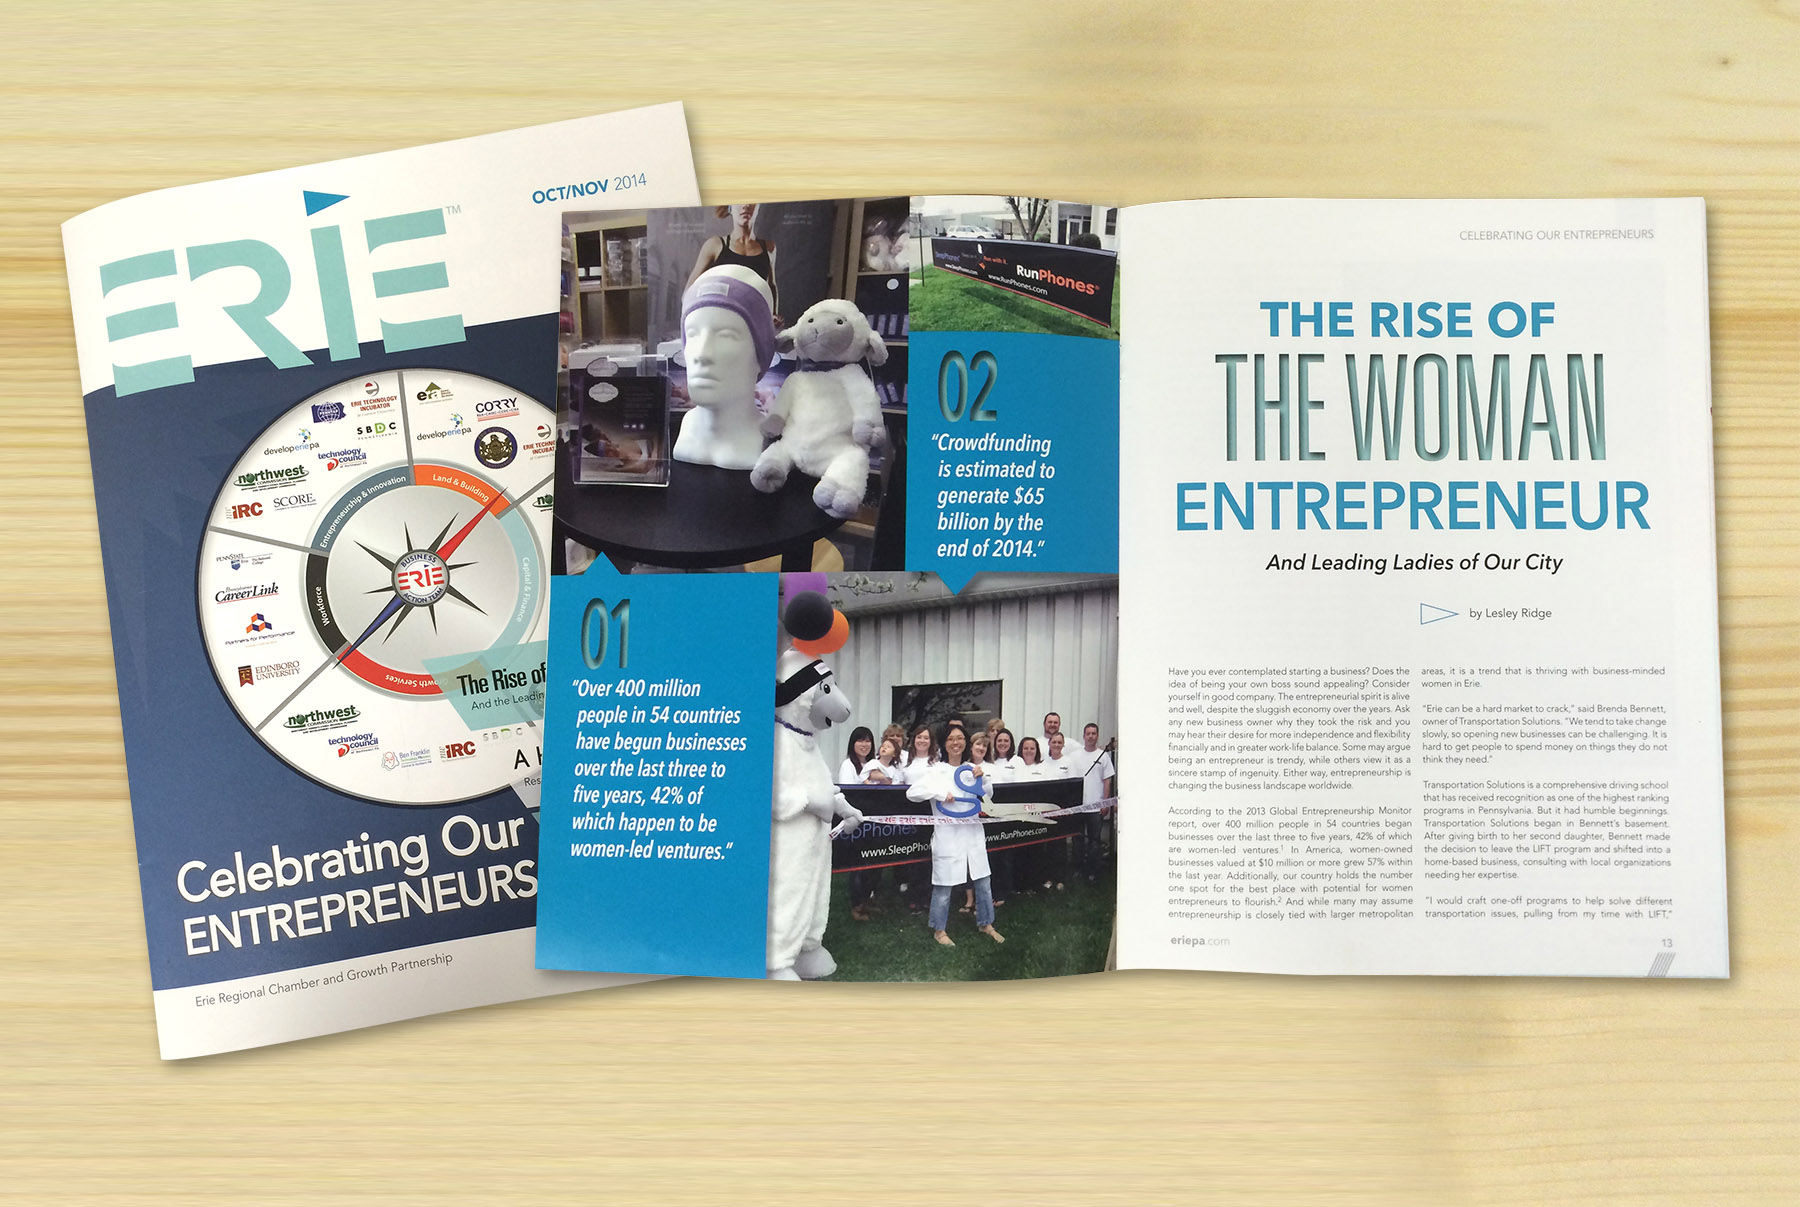 Dr. Wei-Shin Lai featured in article in ERIE Magazine about Women Entrepreneurs